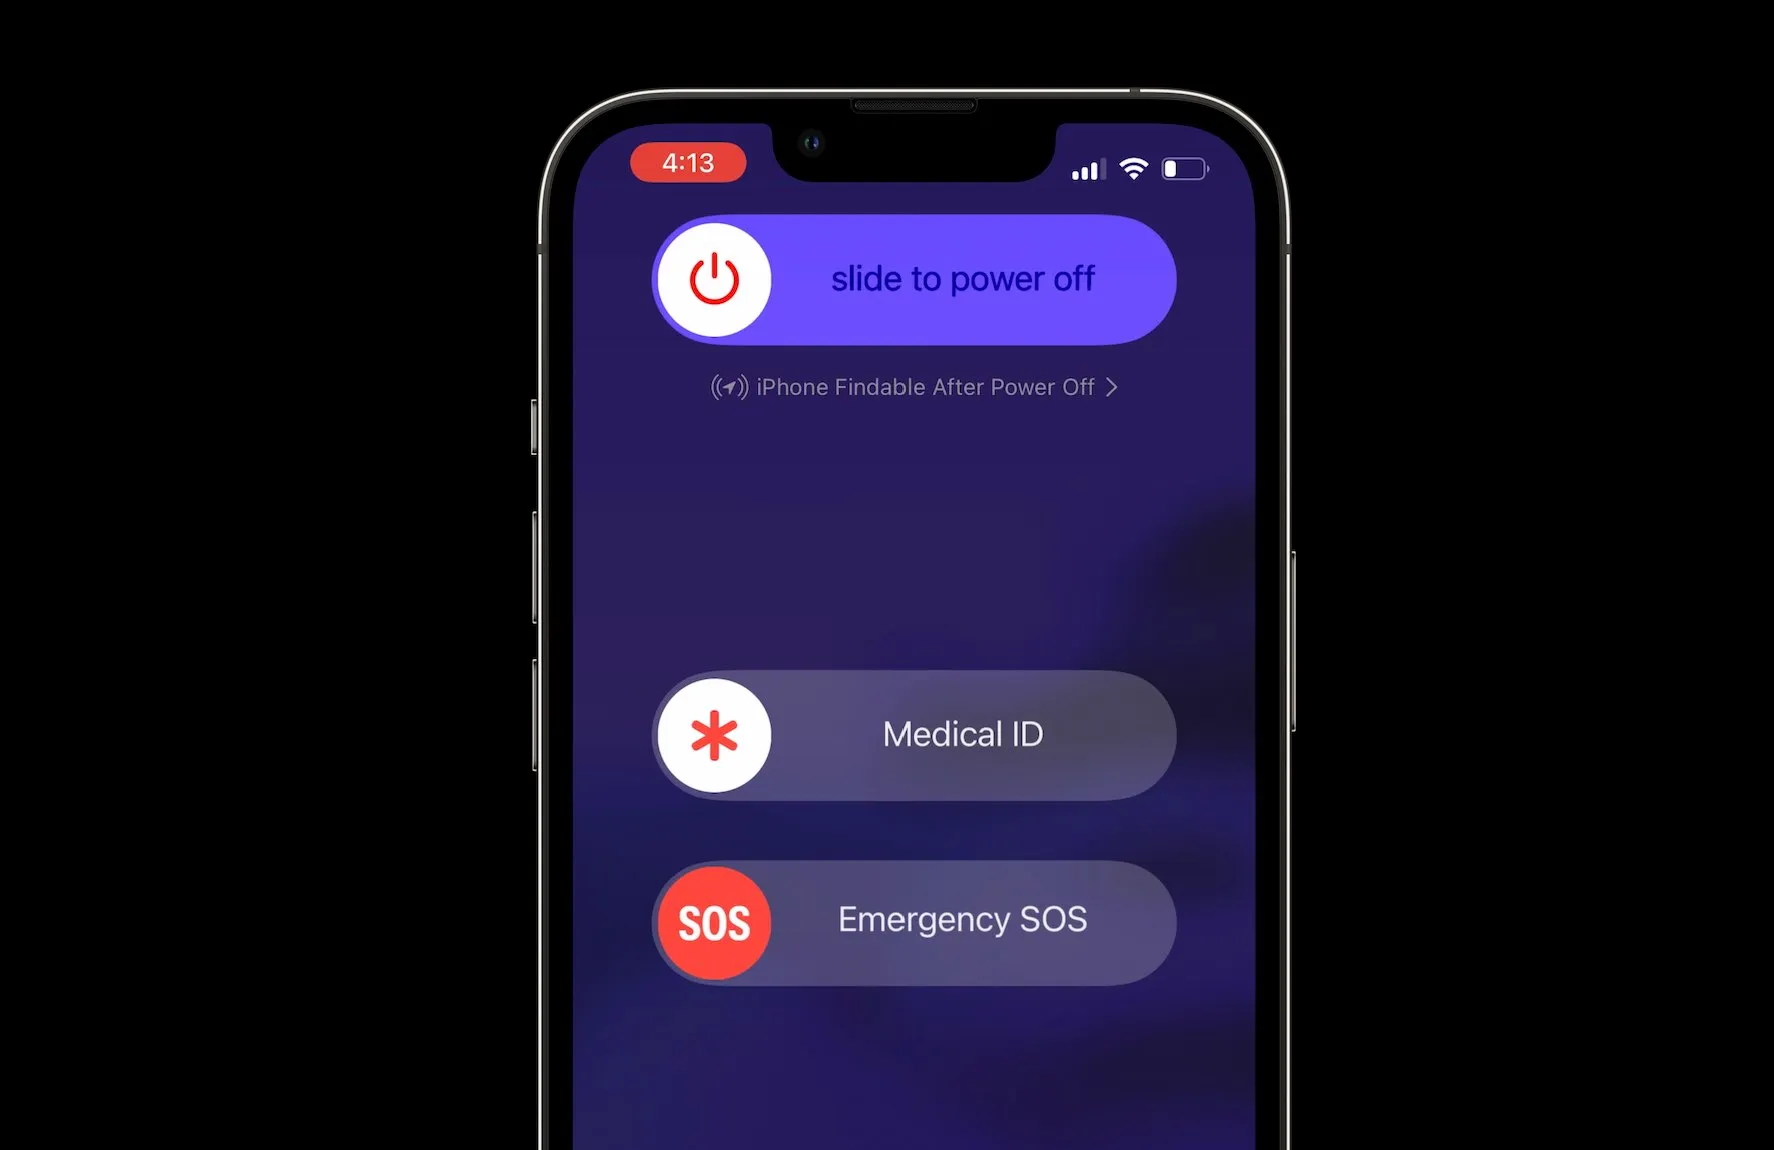 Access and customize Emergency SOS in Settings on iPhone or Apple Watch app